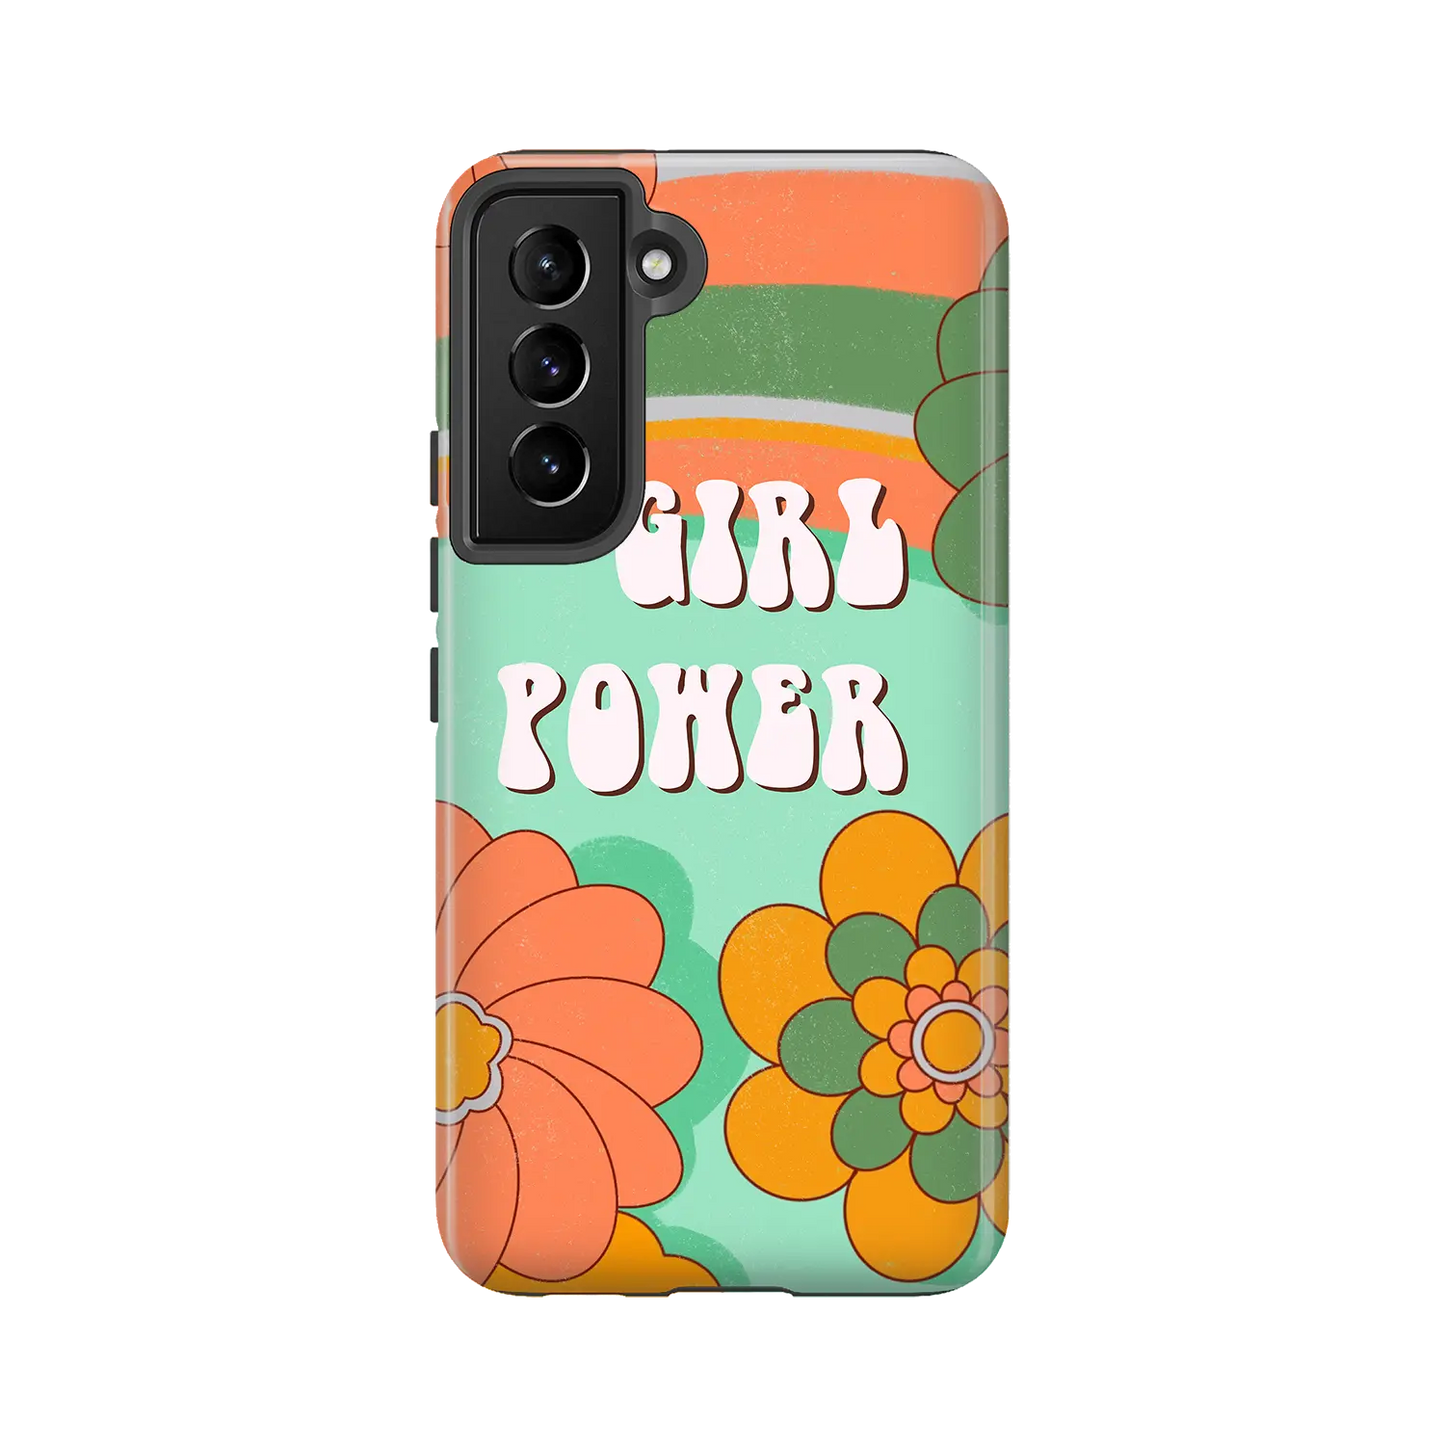 Girl Power - Personalised Galaxy S Case